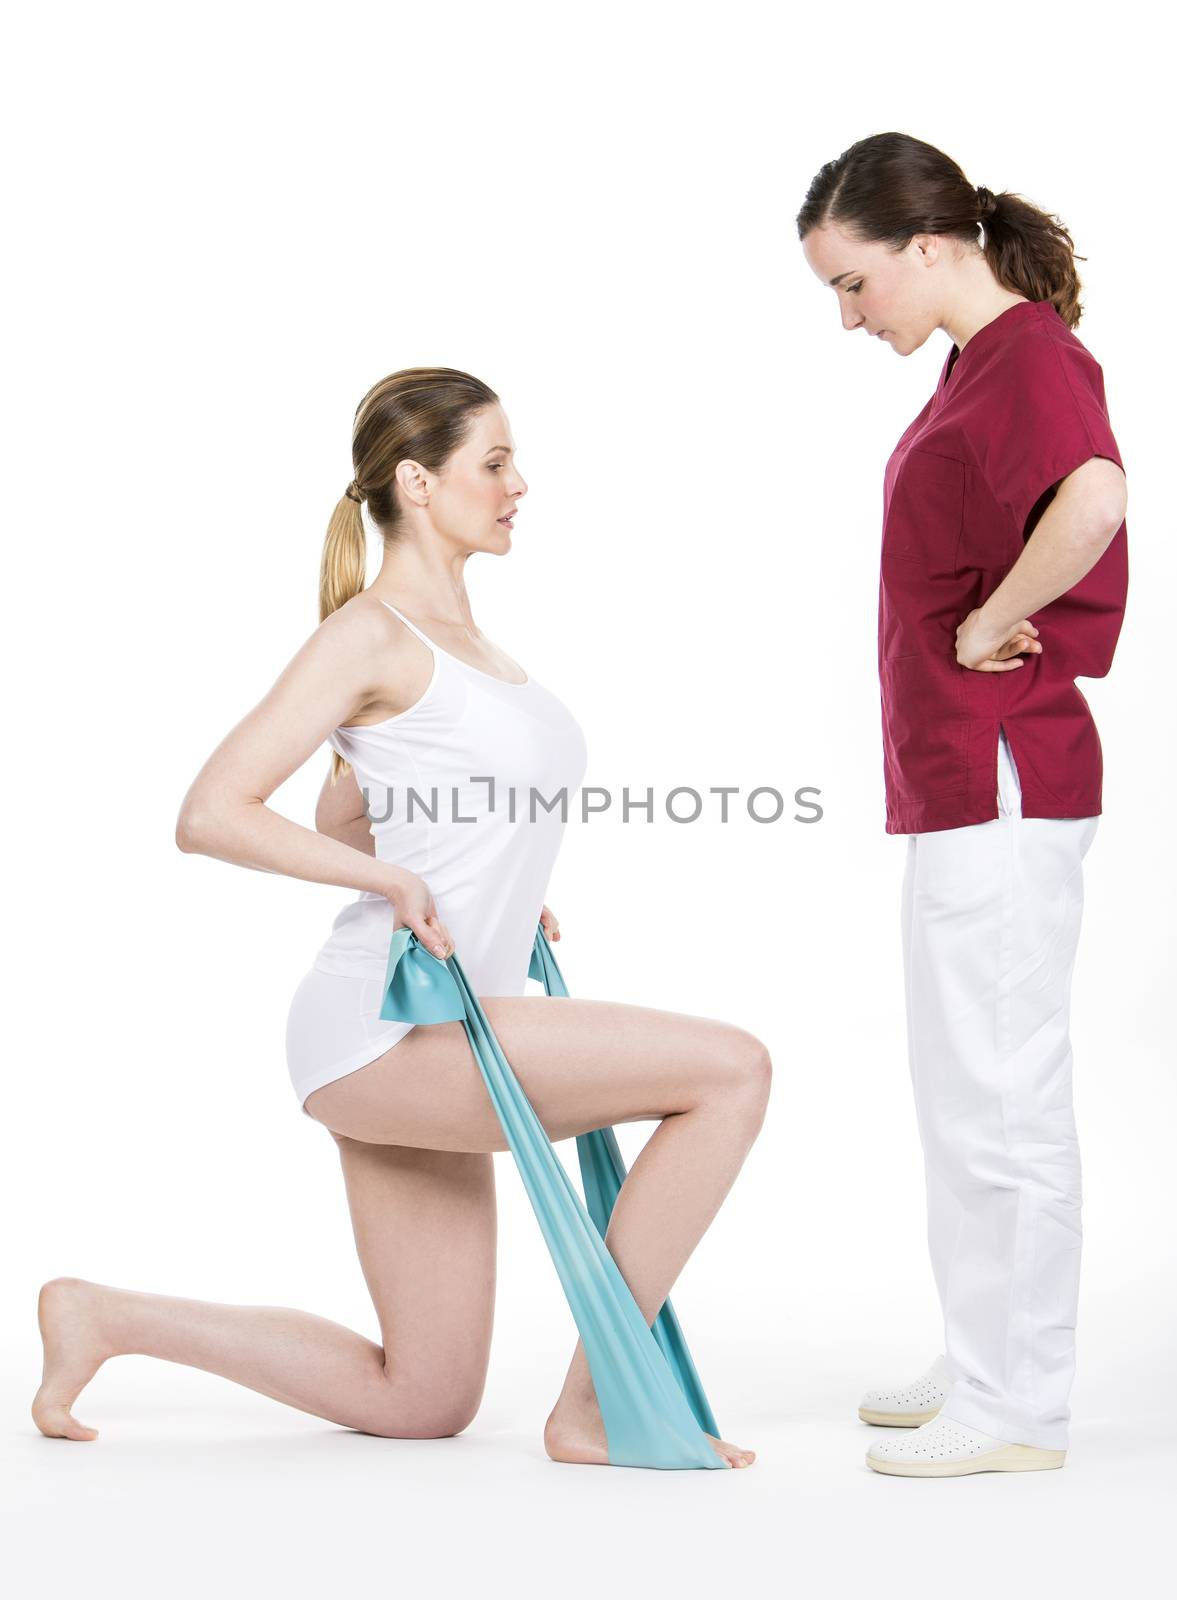 Physiotherapist doing tone with flexible for spine by Flareimage